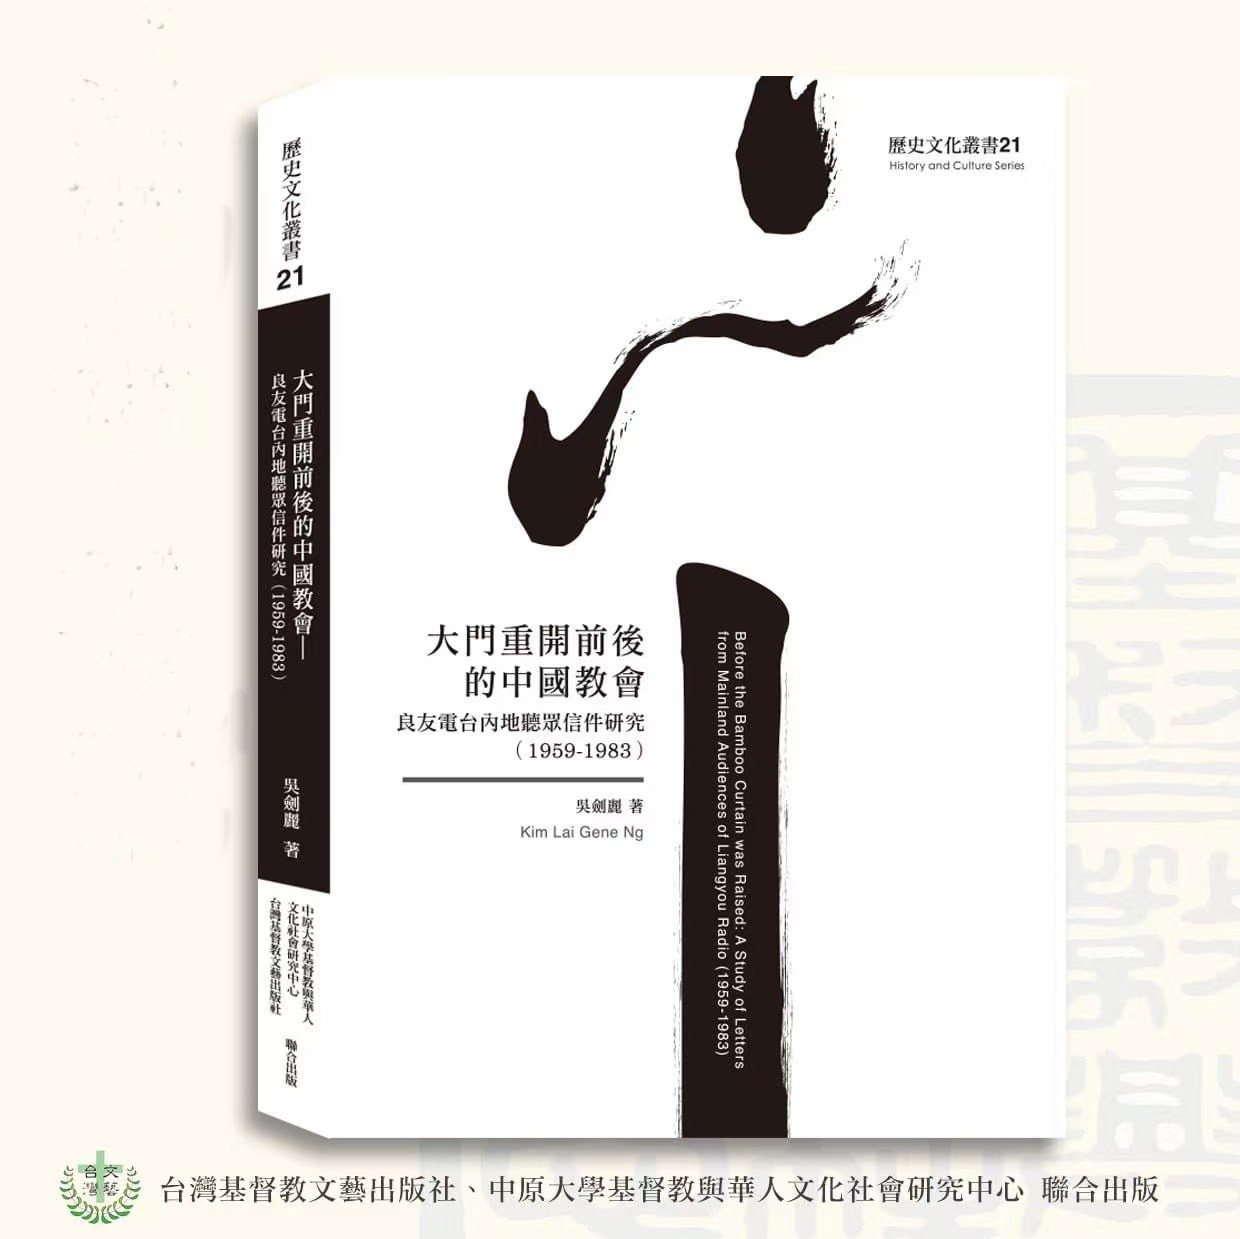 Book of "Before the Bamboo Curtain was Raised: A Study of Letters from Mainland Audiences of Liangyou Radio (1959-1983)"